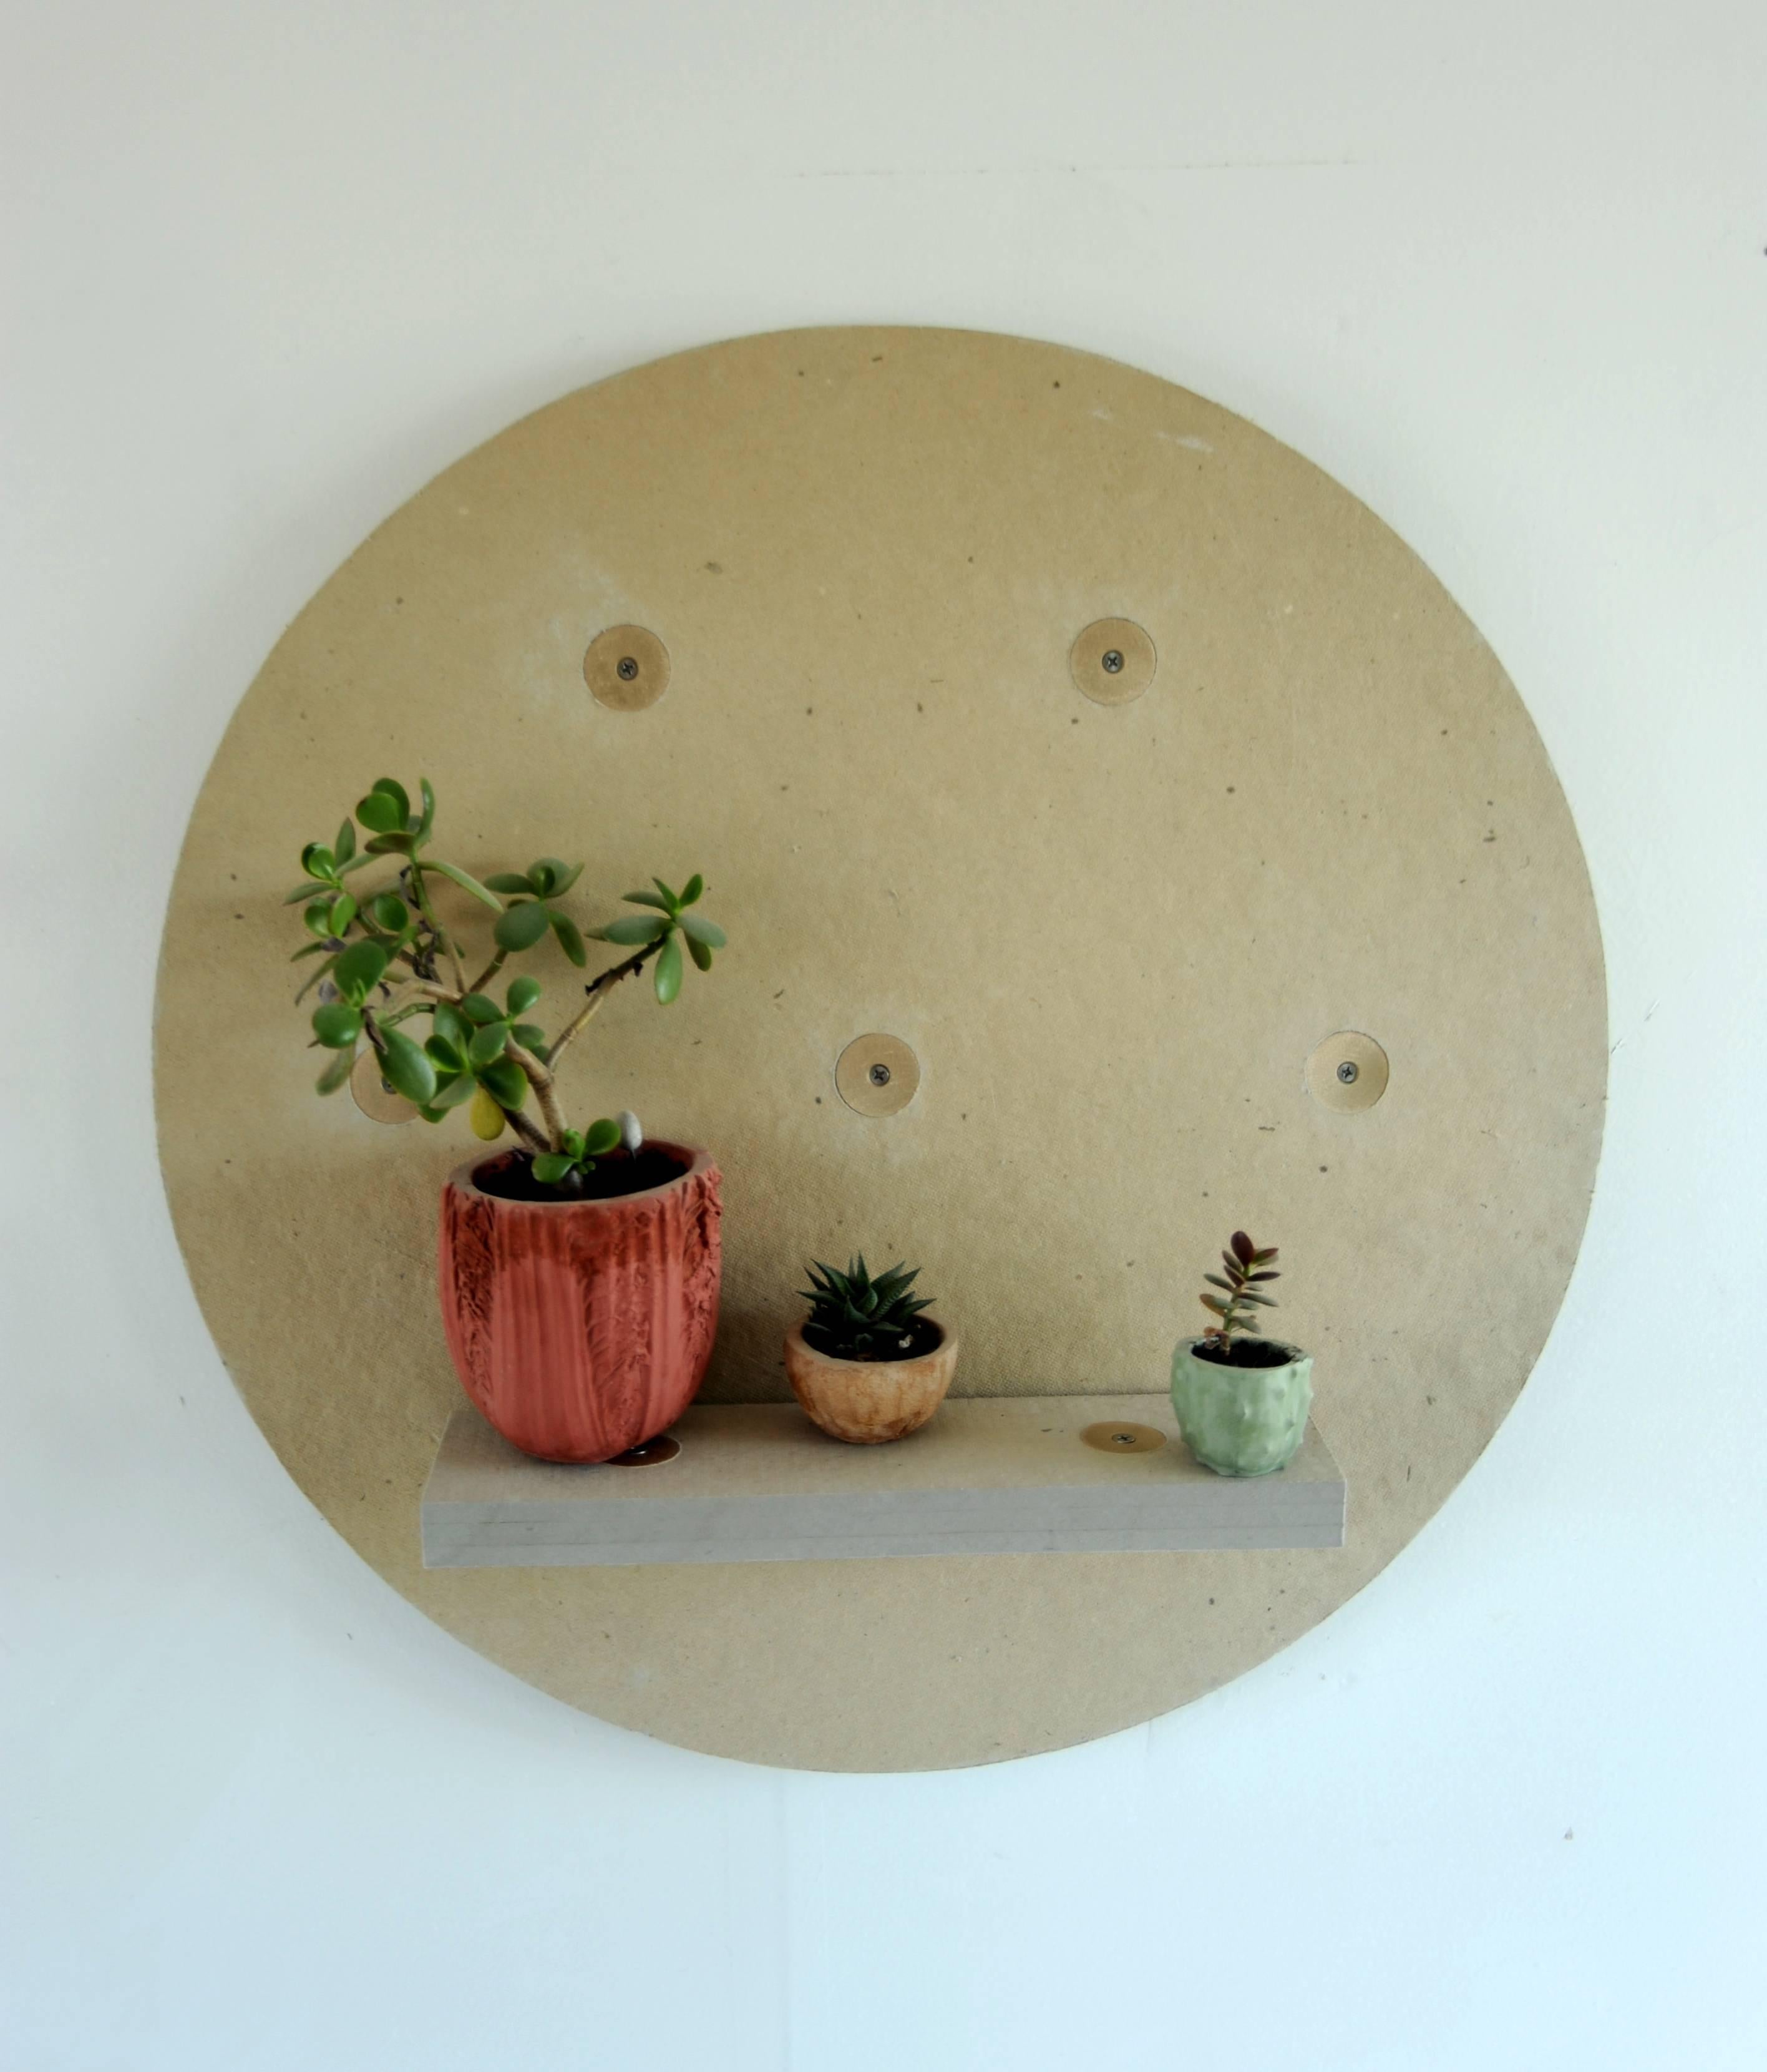 Large Circle Shelf Prototype by Chen Chen & Kai Williams in Homosote

Chen Chen & Kai Williams
Contemporary, USA (Brooklyn NY), 2016
Homasote and Brass
Prototype

References to historical joinery including hand-braised brass compression joints.

Dia